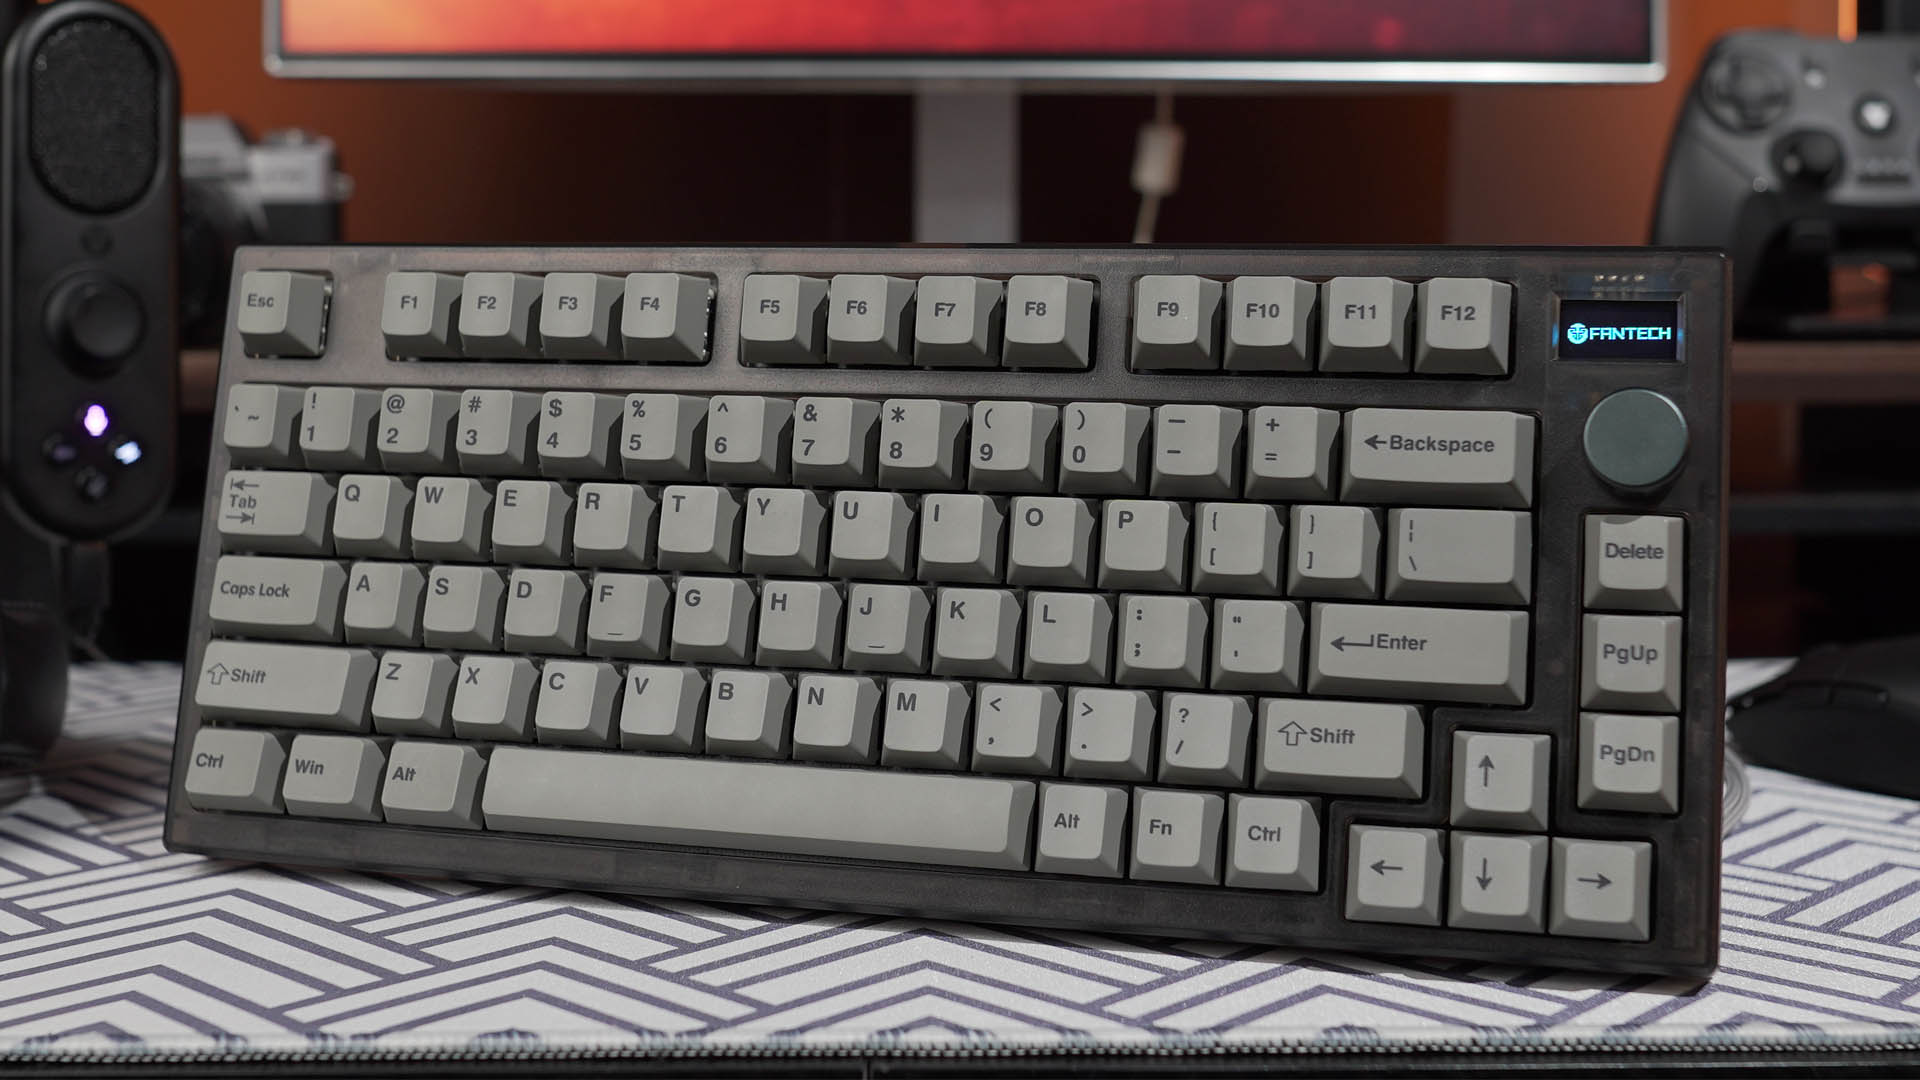 Optical vs Mechanical Keyboards - What's The Difference?